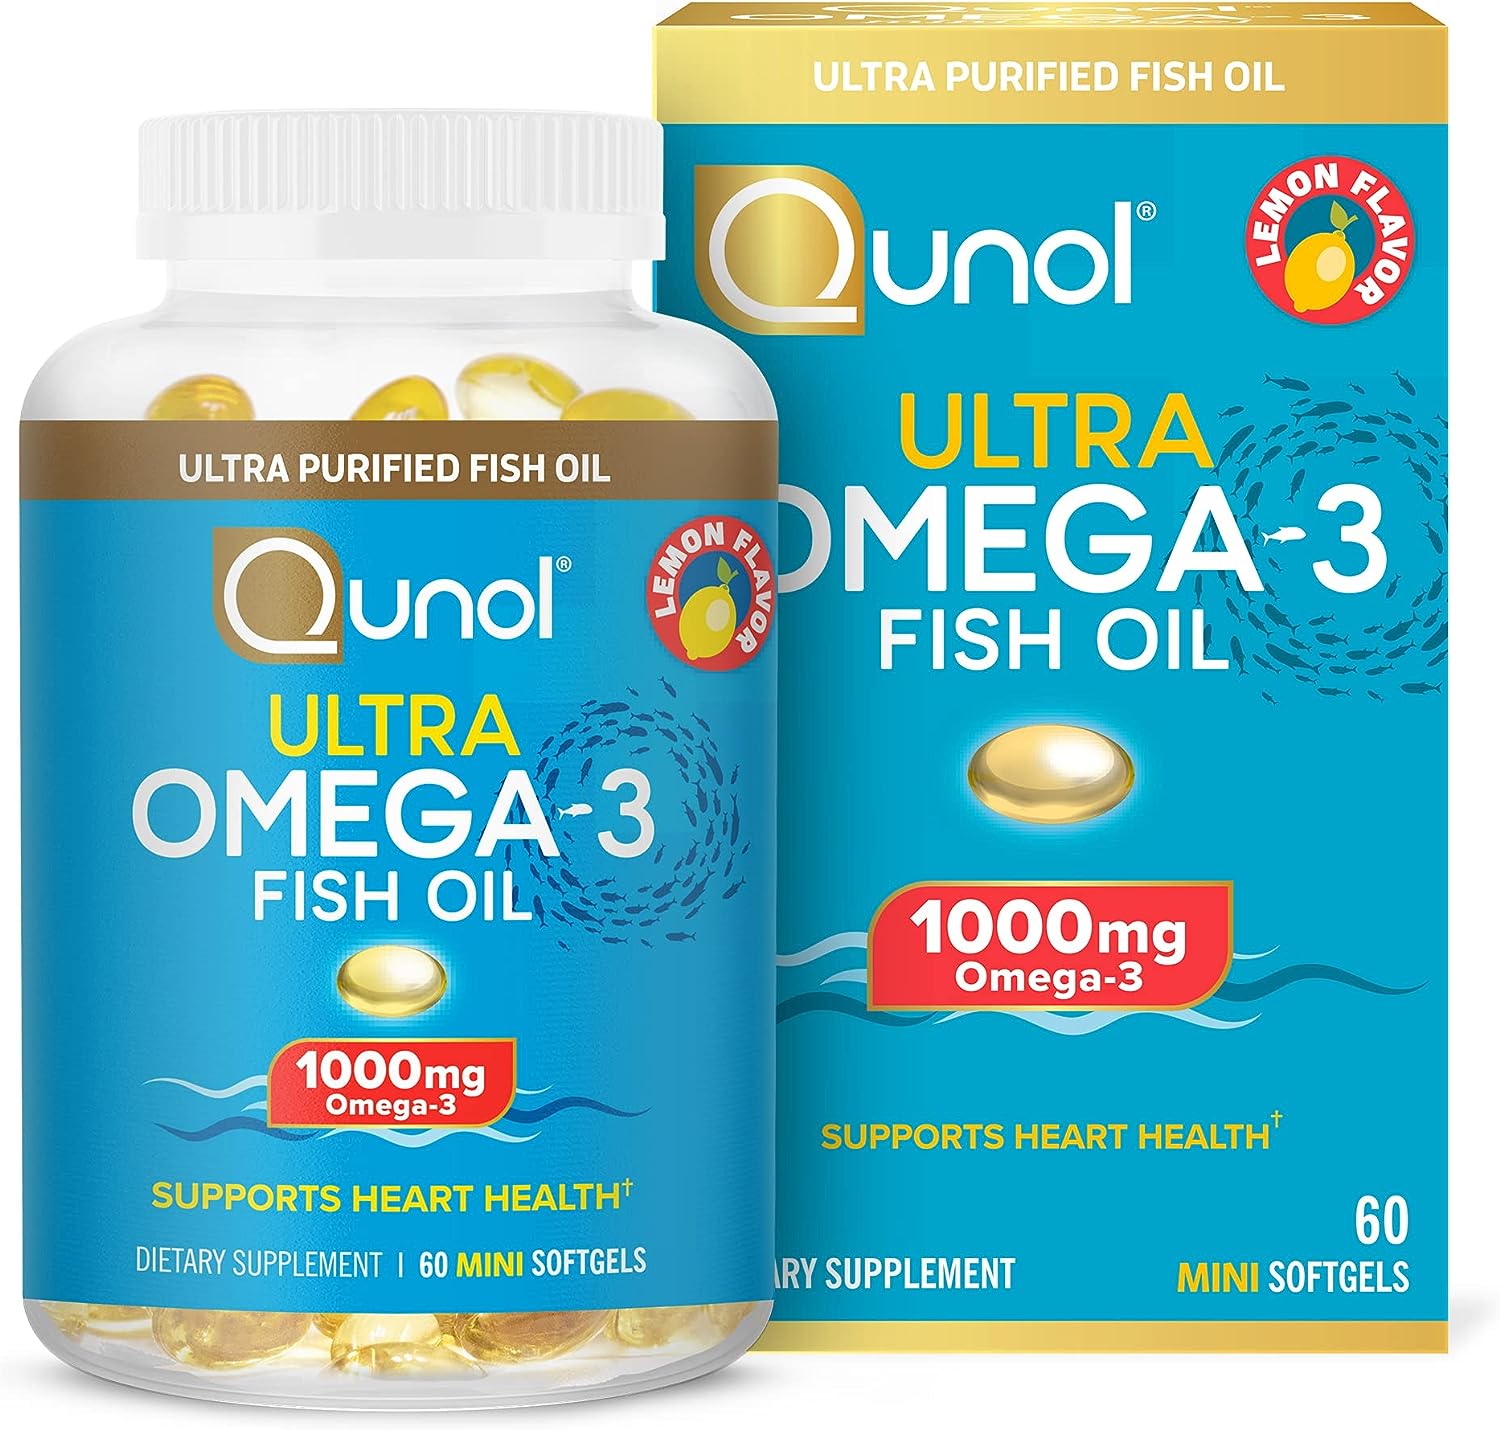 Qunol Omega 3 Fish Oil Mini Softgels, 1000mg Omega 3 EPA + DHA, Ultra Pure Fish Oil Supplements, Heart Health Support, Lemon avor, Easy to Swallow Minis, 1 Month Supply, 60 Count